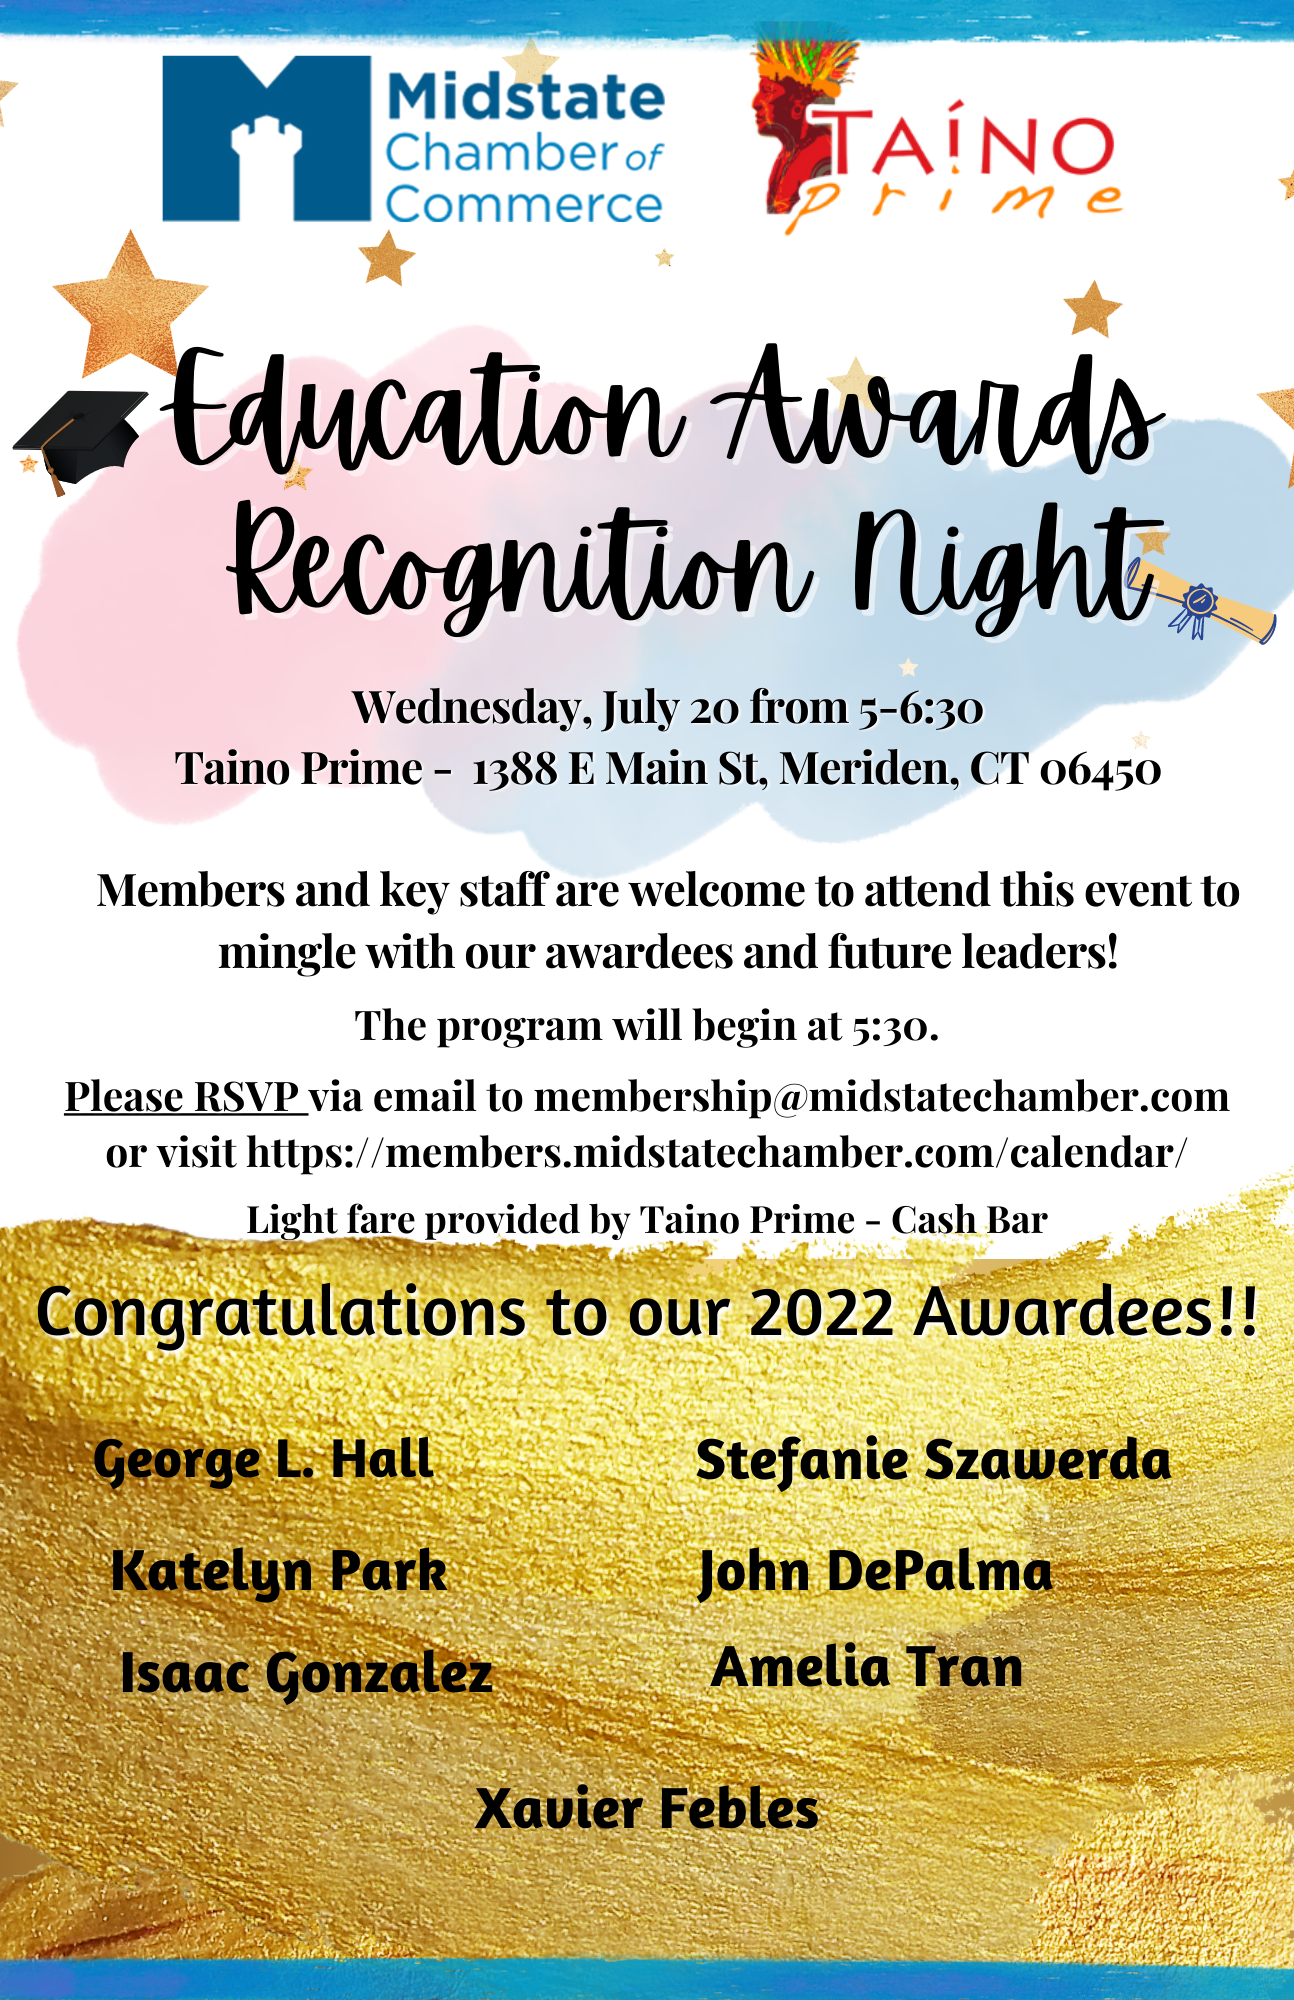 Brochure for Education Awards Recognition Night